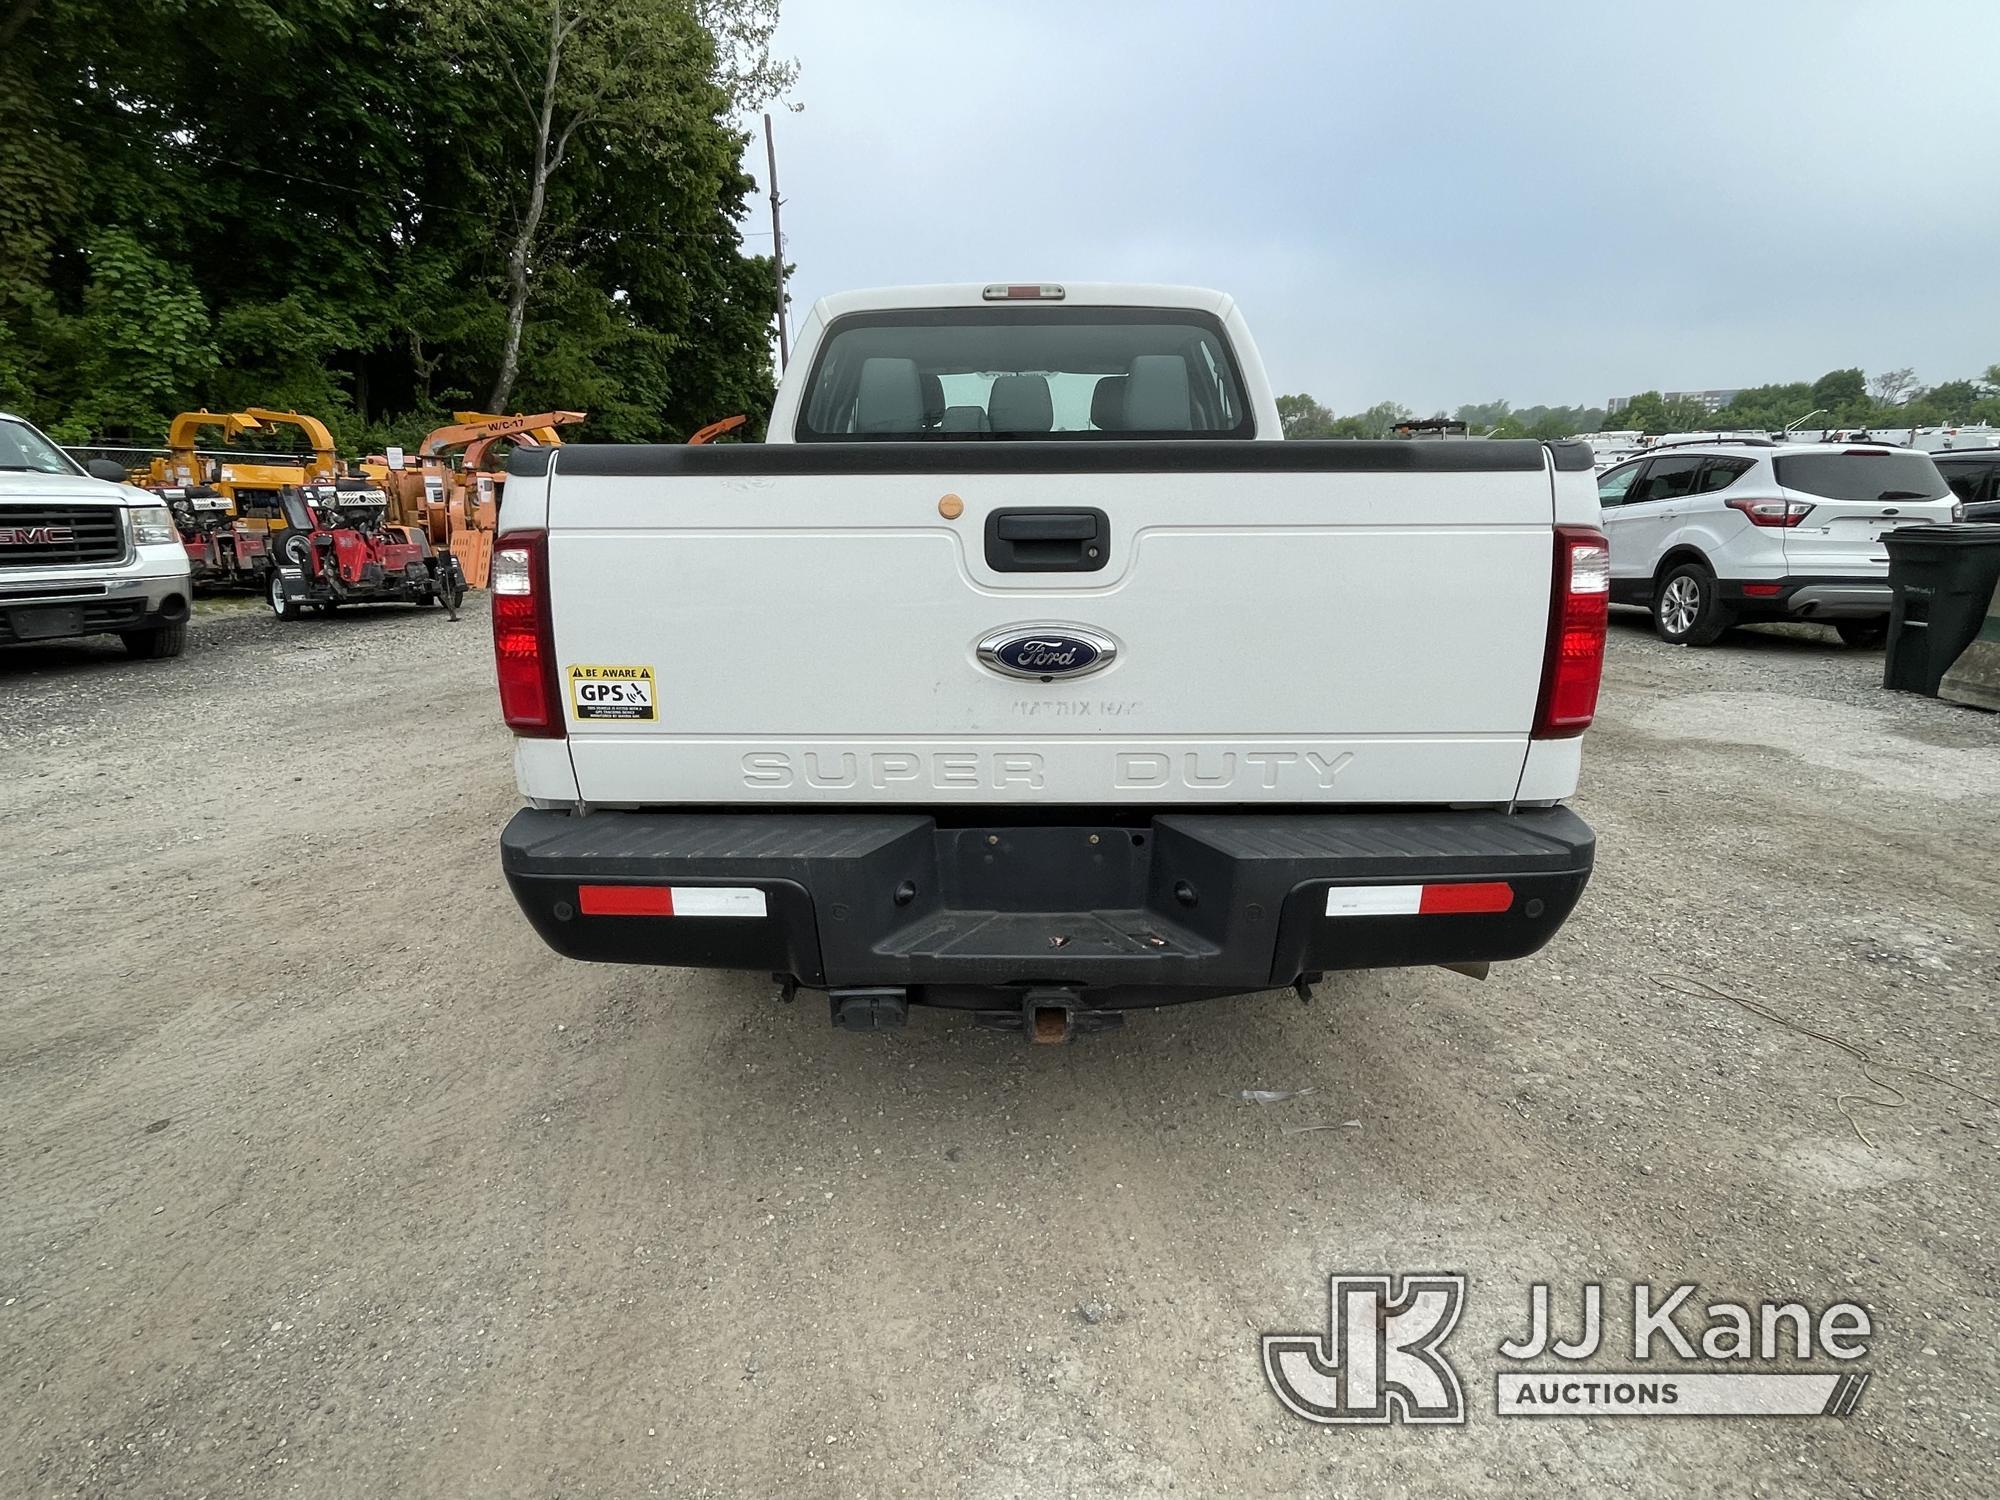 (Plymouth Meeting, PA) 2016 Ford F250 4x4 Crew-Cab Pickup Truck Runs & Moves, Front End Damage, Body